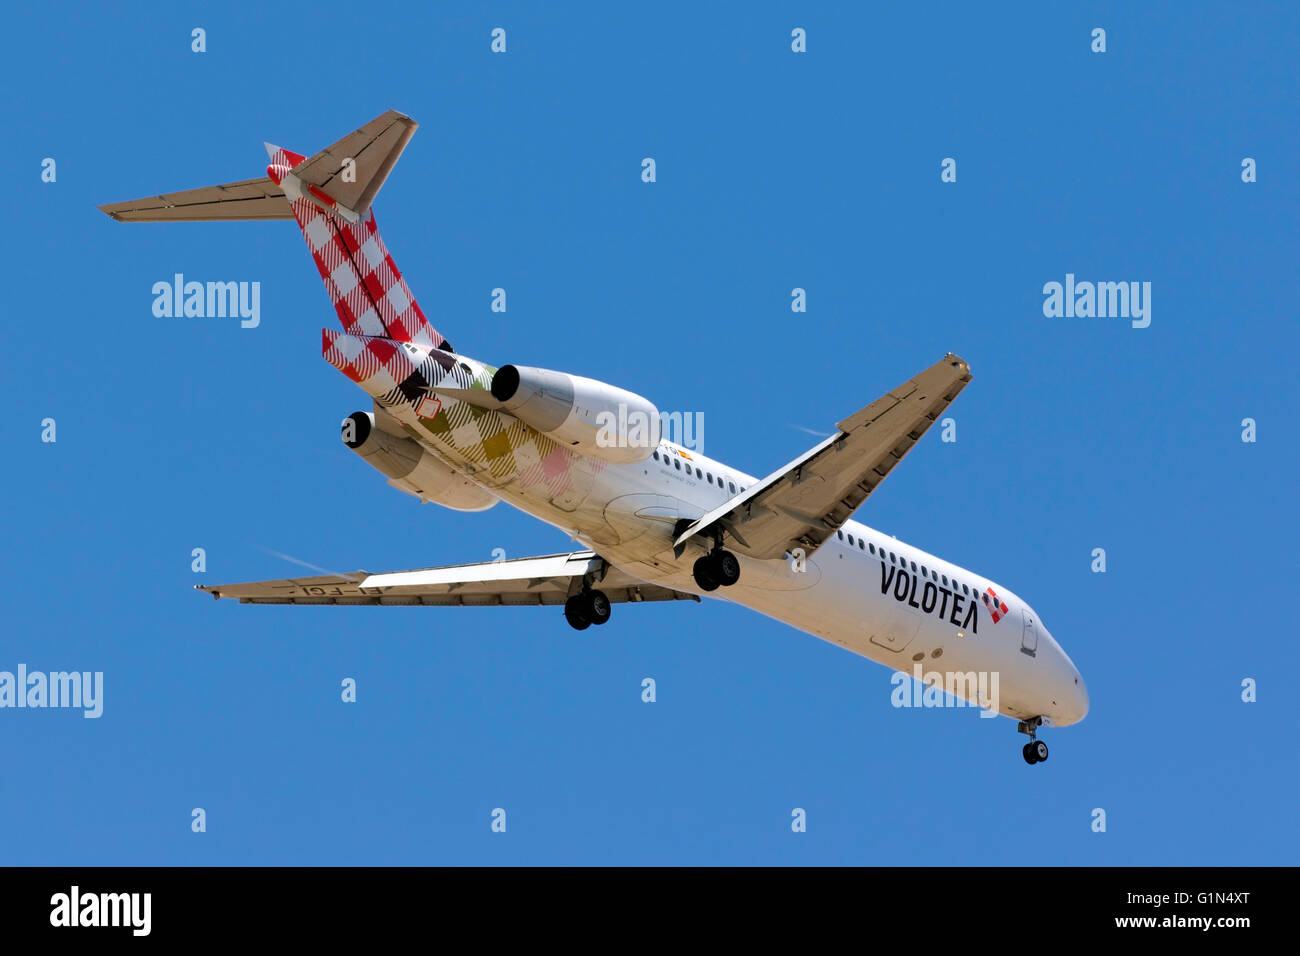 Volotea Boeing 717-2BL [EI-FGI] on long finals for runway 31. Volotea is a low cost Spanish Airline. Stock Photo